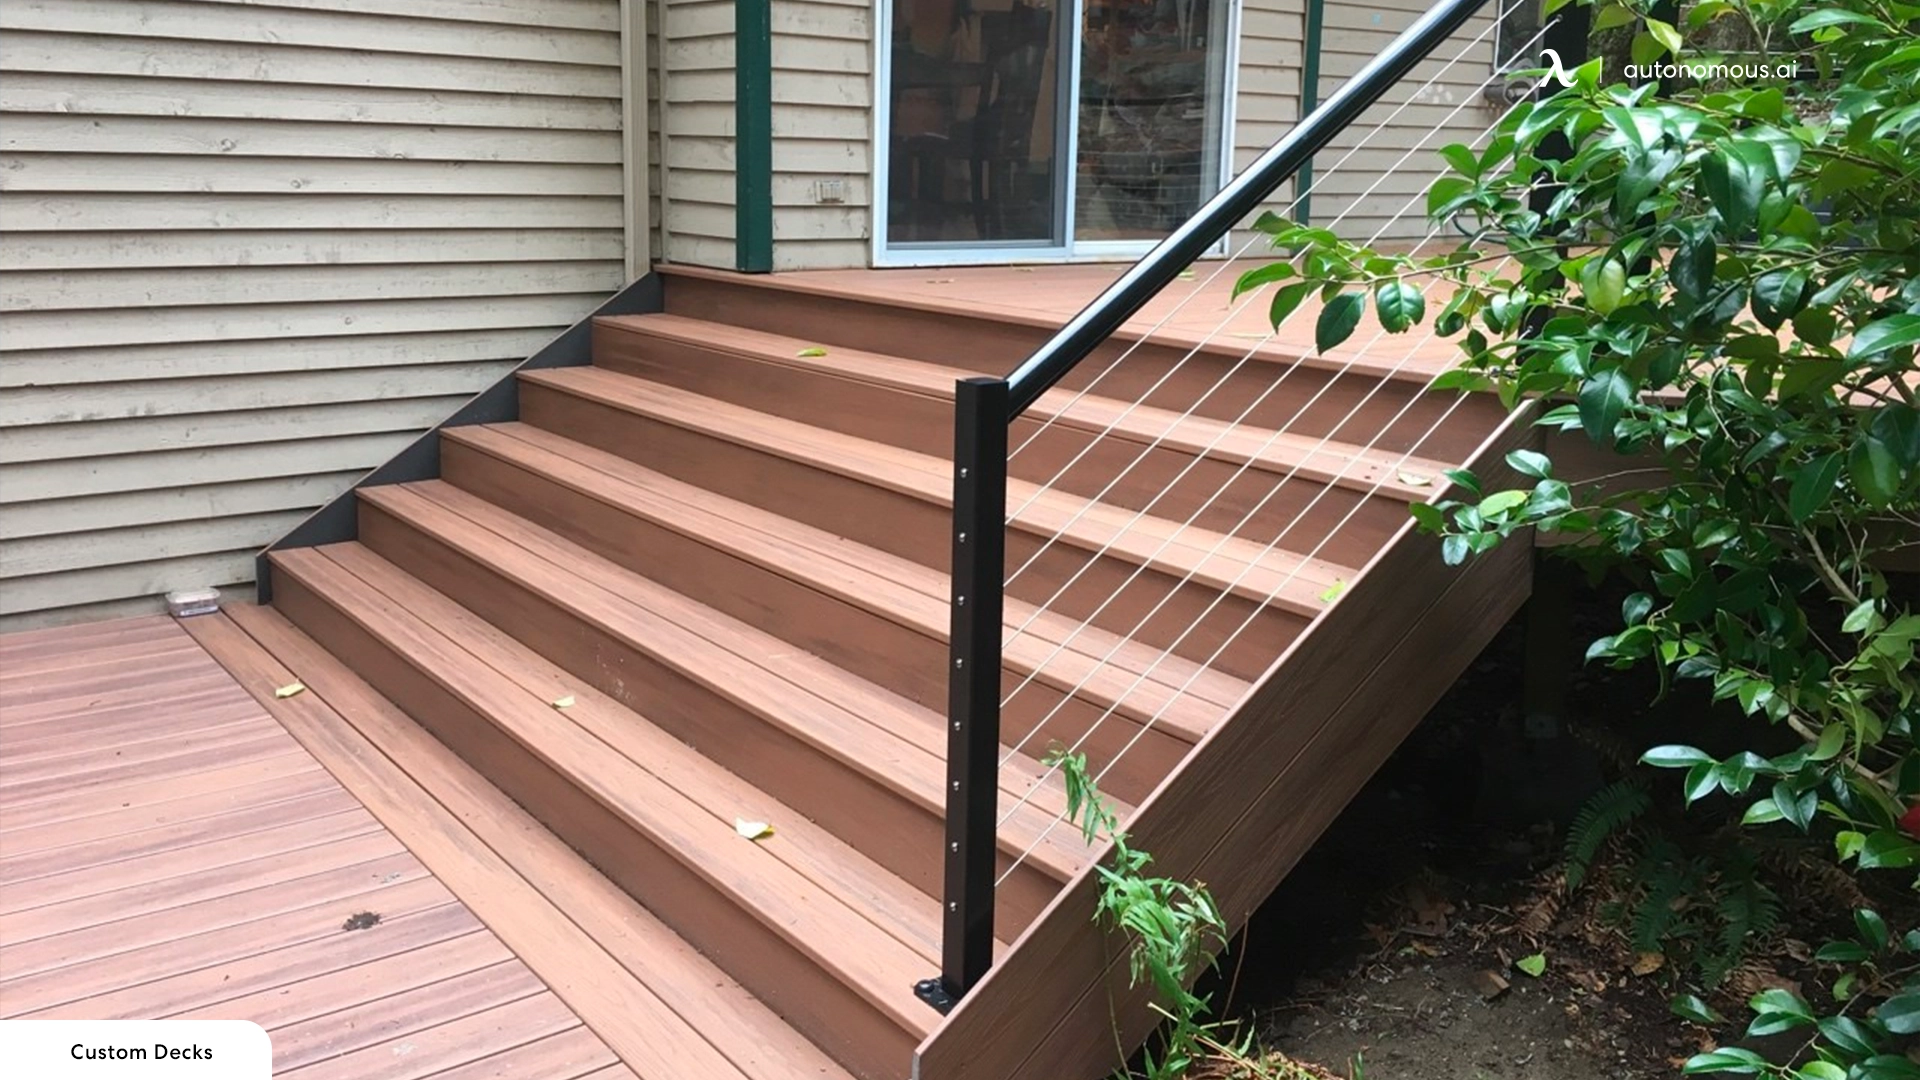 Are There Any Building Codes or Regulations for Mobile Home Steps?